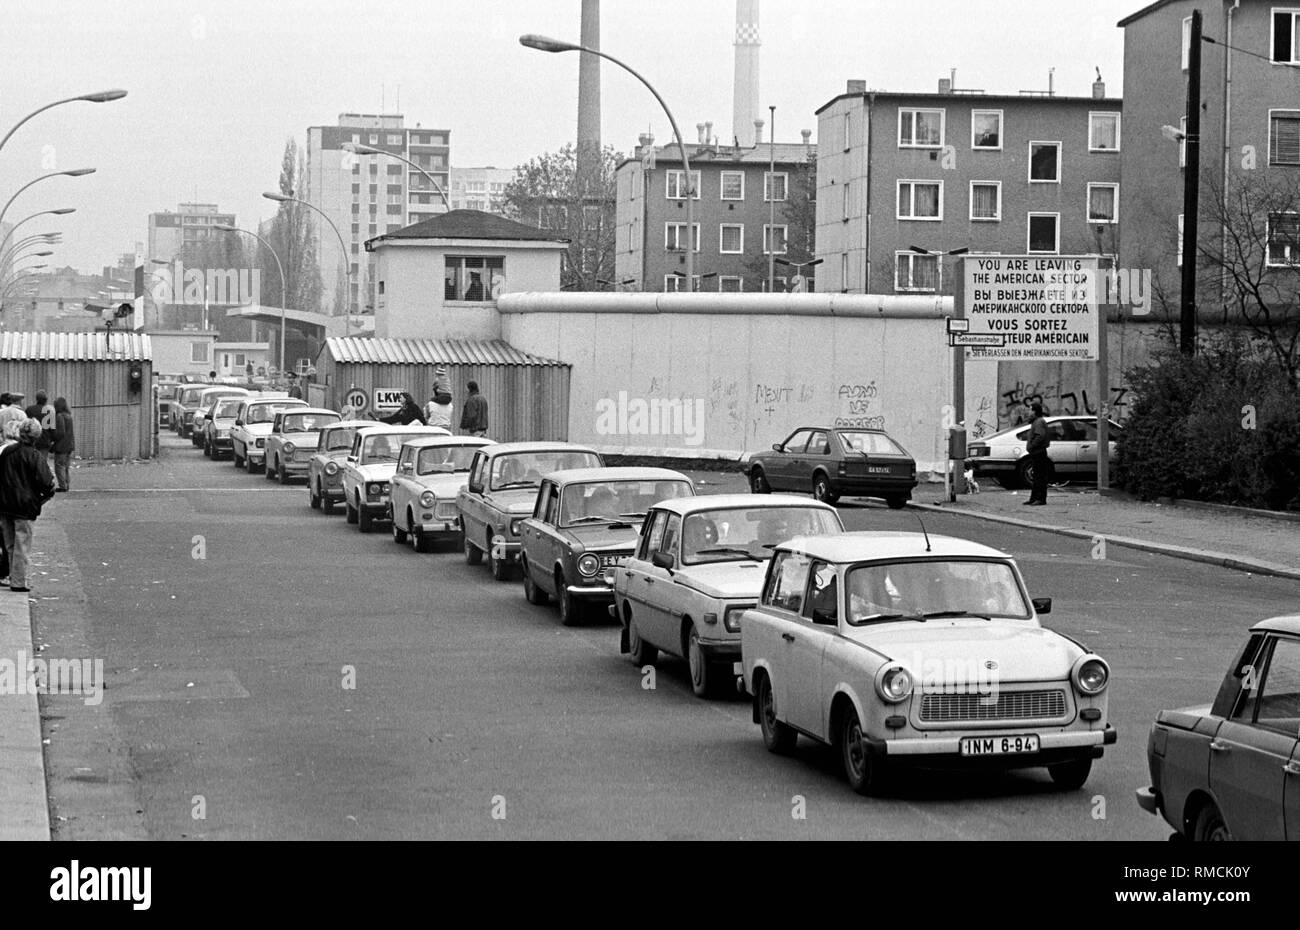 Berlin, November 11, 1989 - Citizens from the eastern part of Berlin take  the opportunity for a short visit in the western part of the city after the  opening of the border